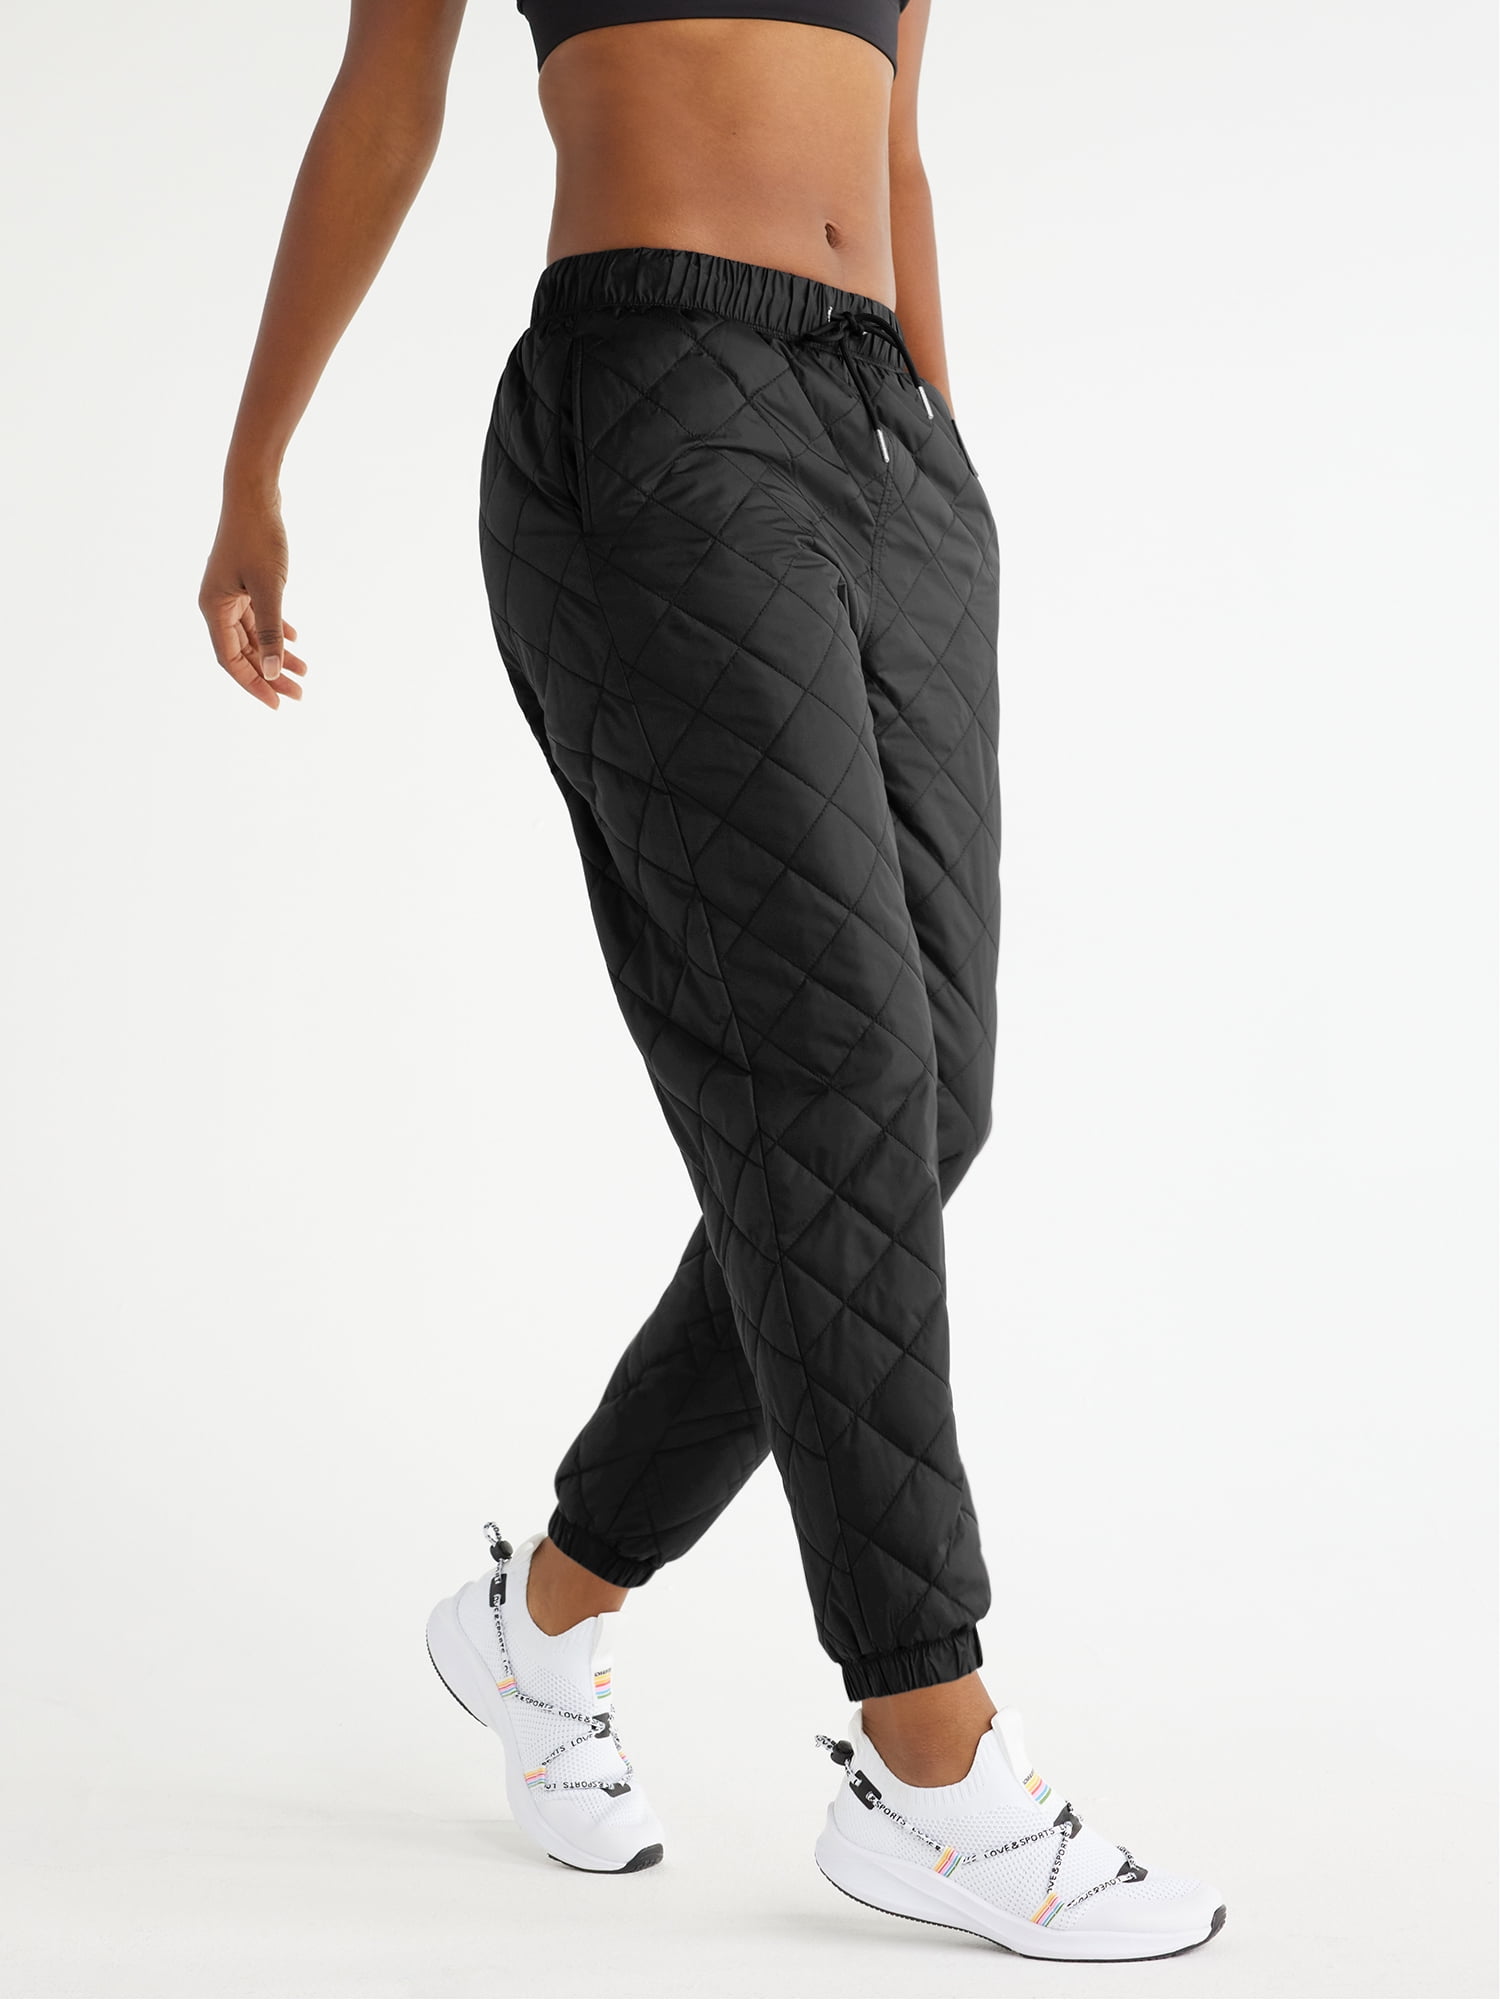 Love & Sports Women's Quilted Jogger Pants, 27” Inseam, Sizes XS